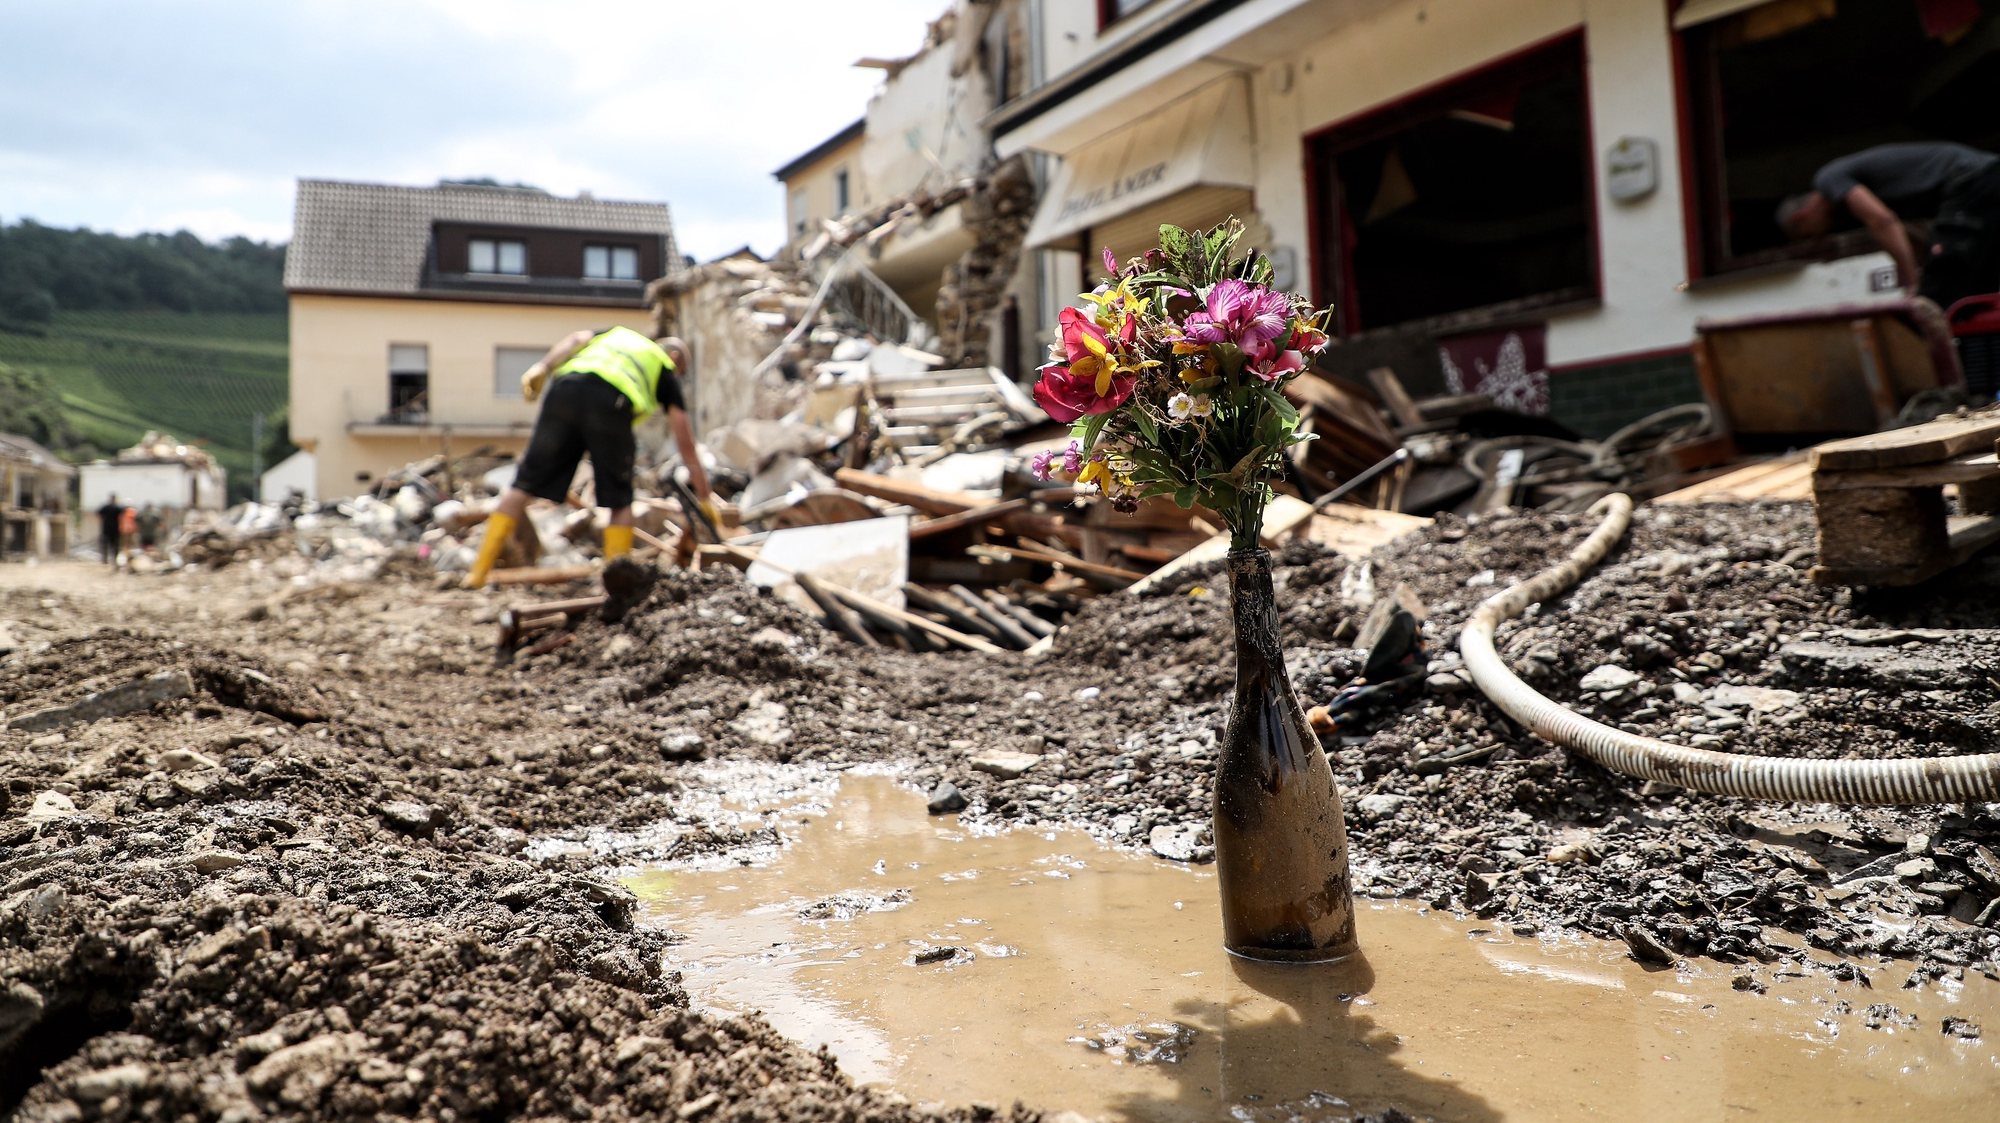 epaselect epa09358245 Flowers in a wine bottle standing in front of a destroyed house after the flooding of the Ahr River, in Mayschoss in the district of Ahrweiler, Germany, 22 July 2021. Large parts of Western Germany were hit by heavy, continuous rain in the night to 15 July resulting in local flash floods that destroyed buildings and swept away cars.  EPA/FRIEDEMANN VOGEL